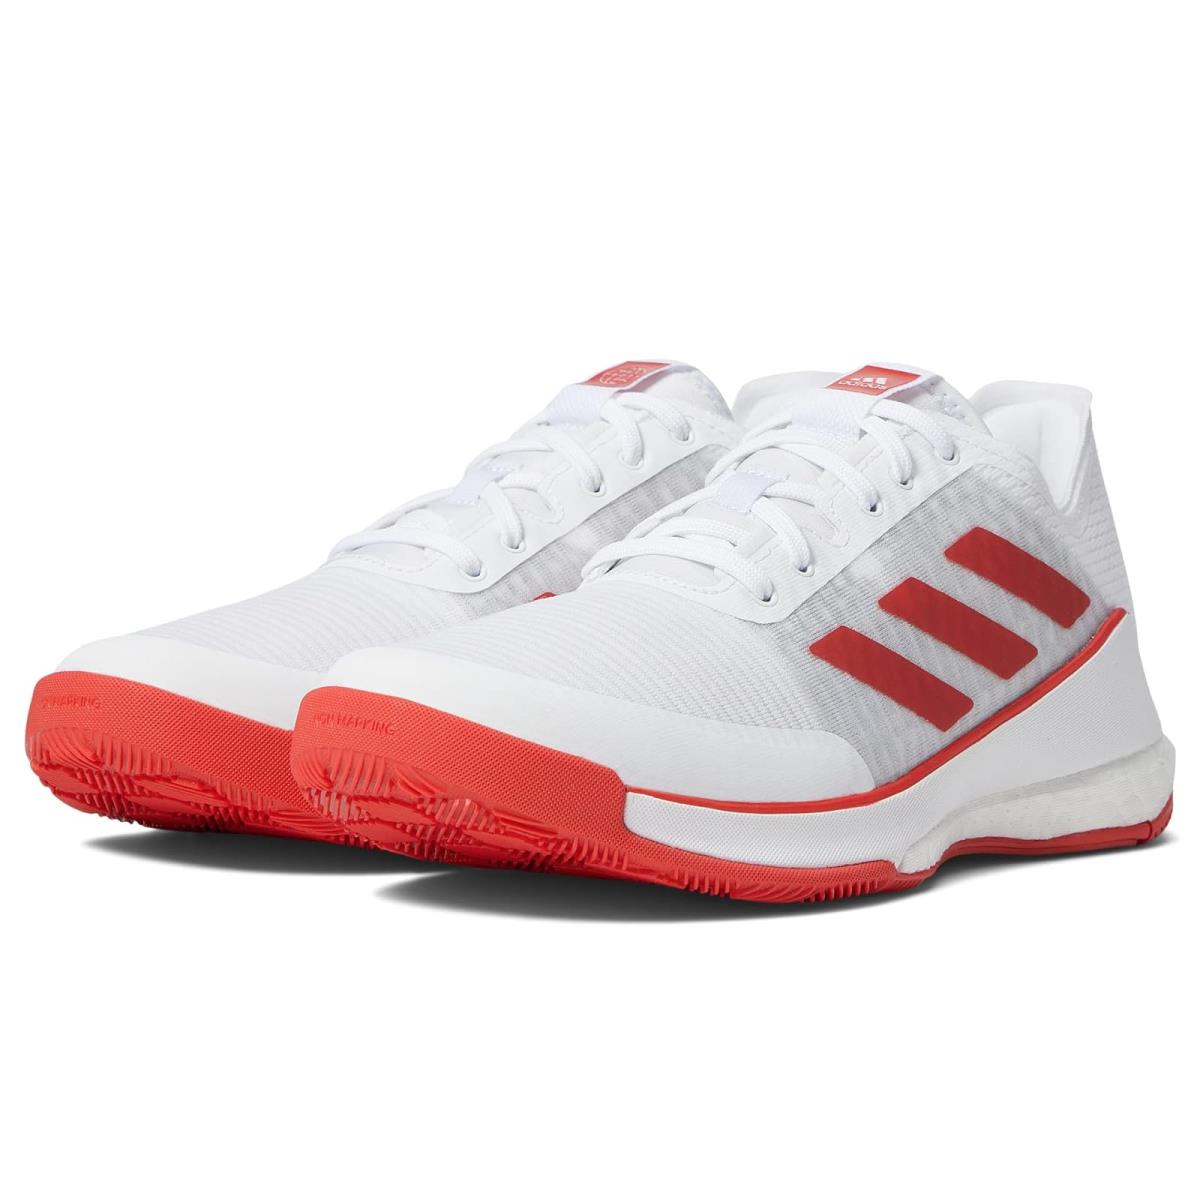 Woman`s Sneakers Athletic Shoes Adidas Crazyflight White/Vivid Red/Vivid Red